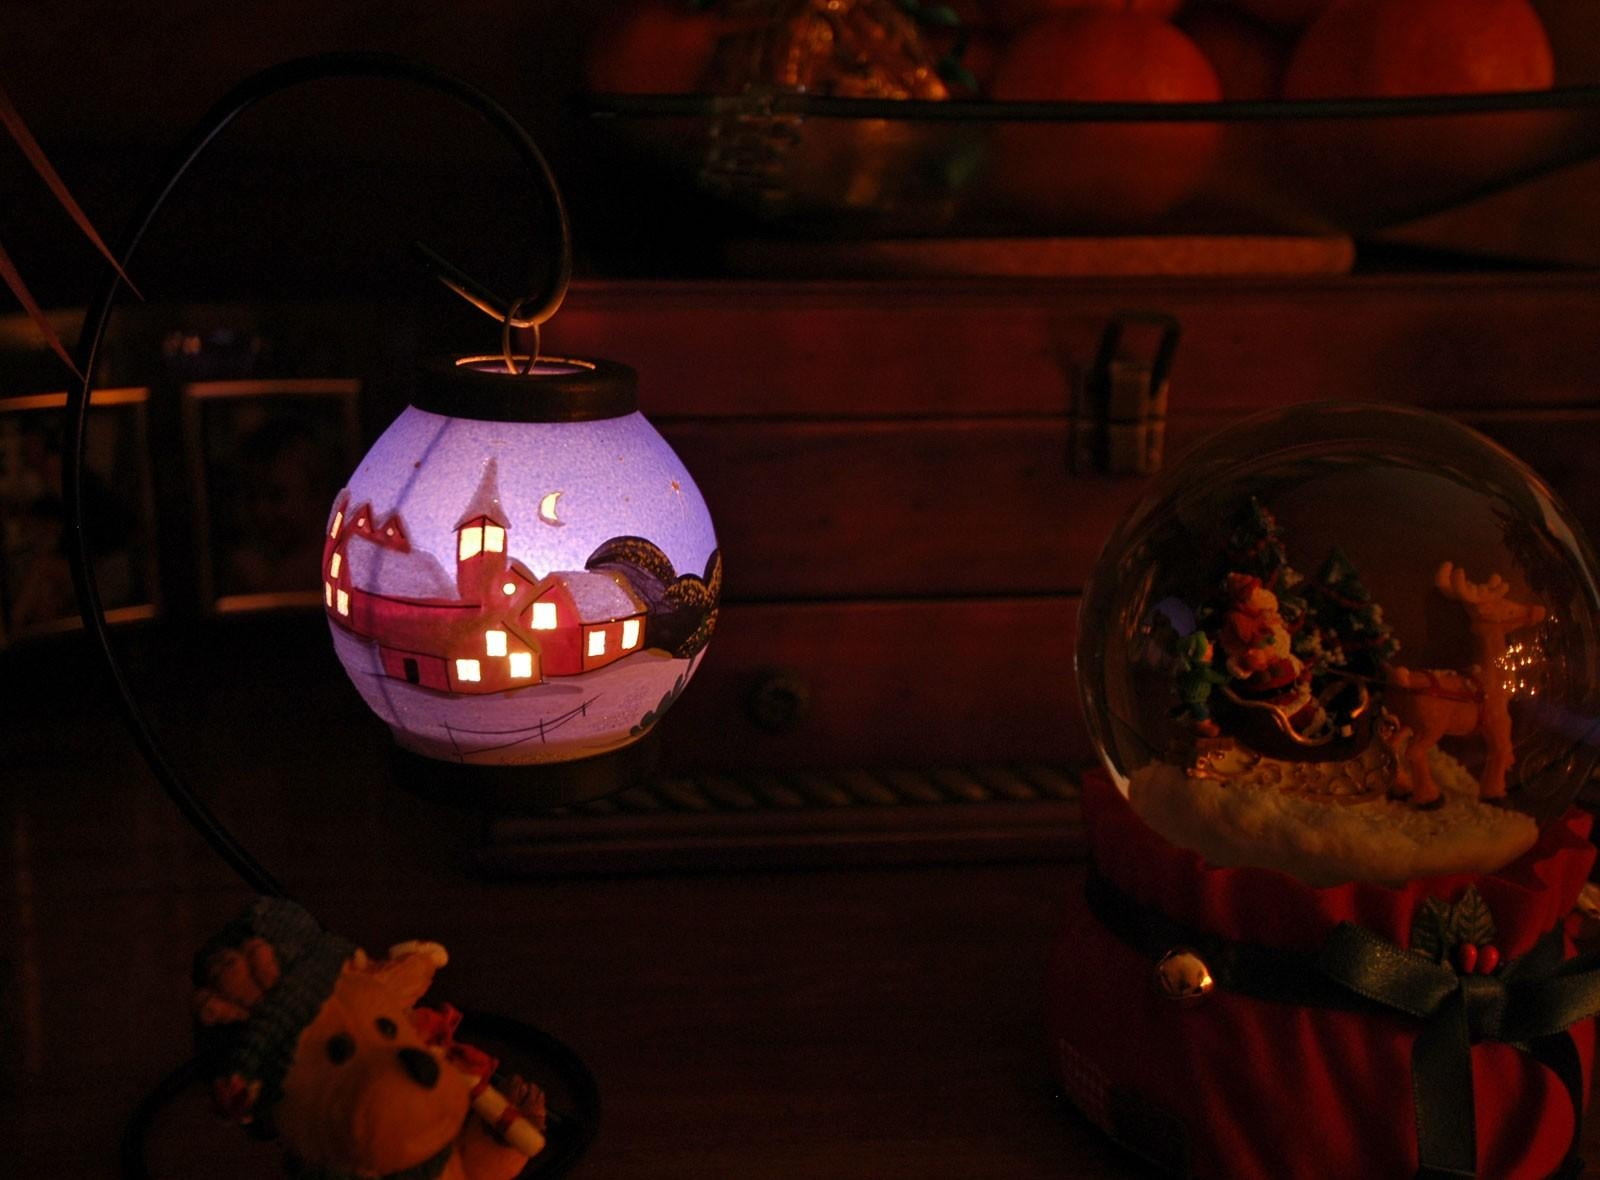 white, orange, and purple houses-printed lamp, ball, toys, lamps